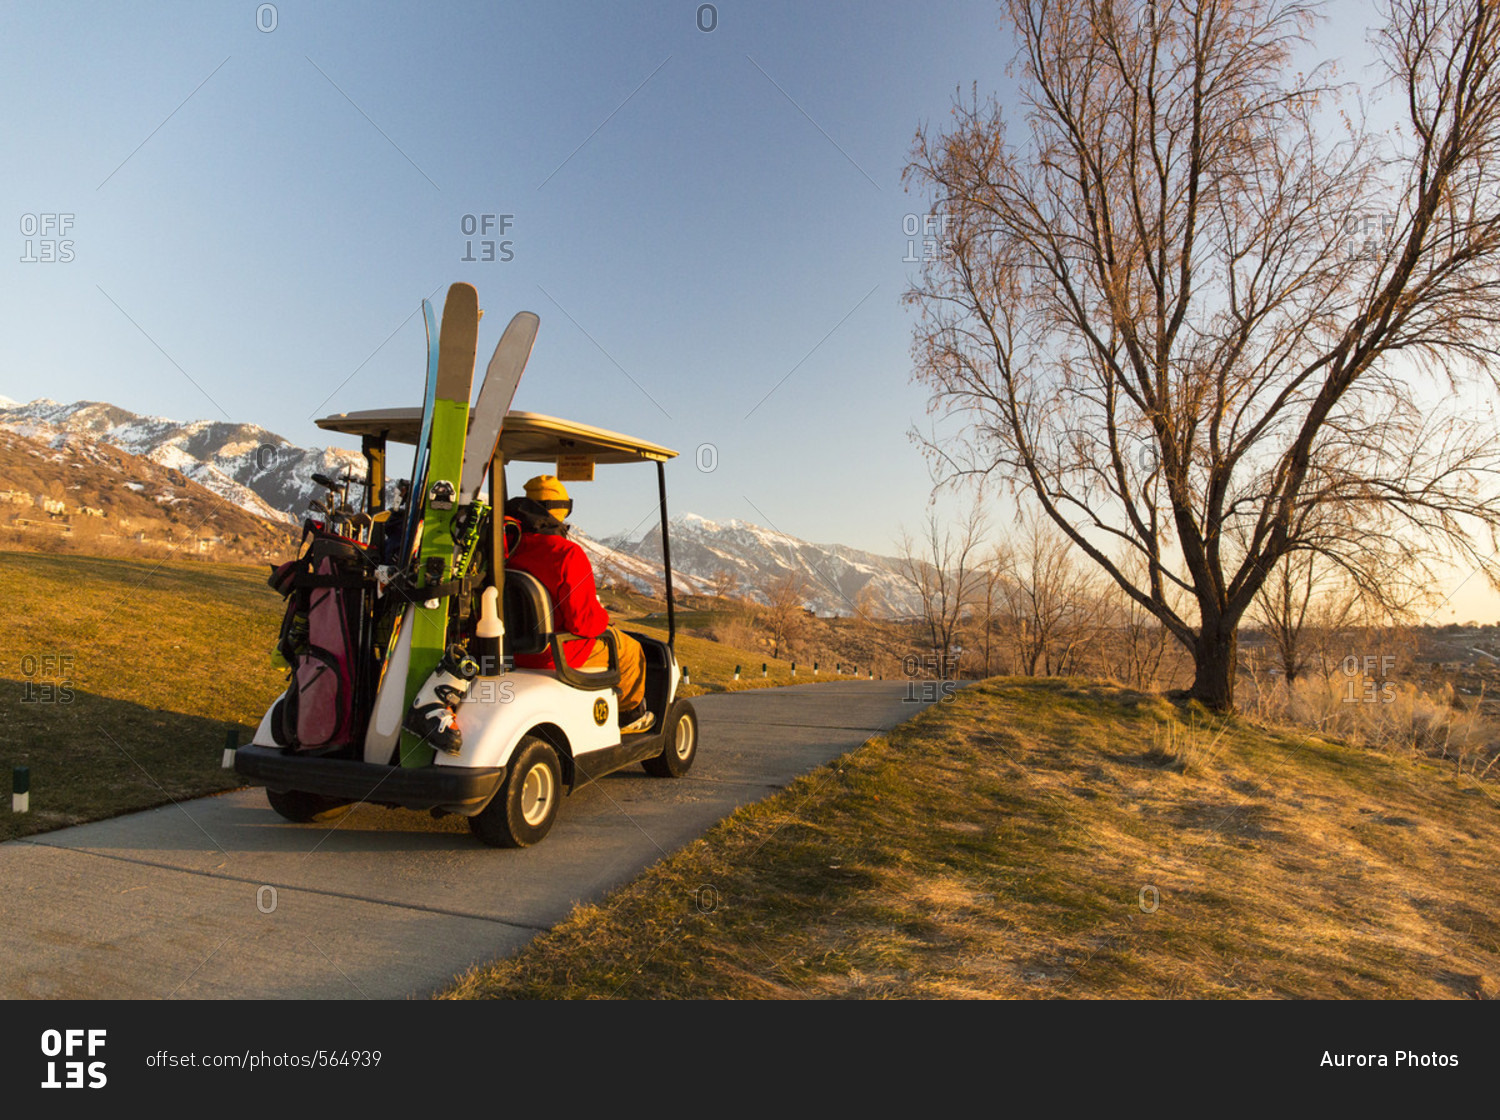 People on electric cart with skis at golf course